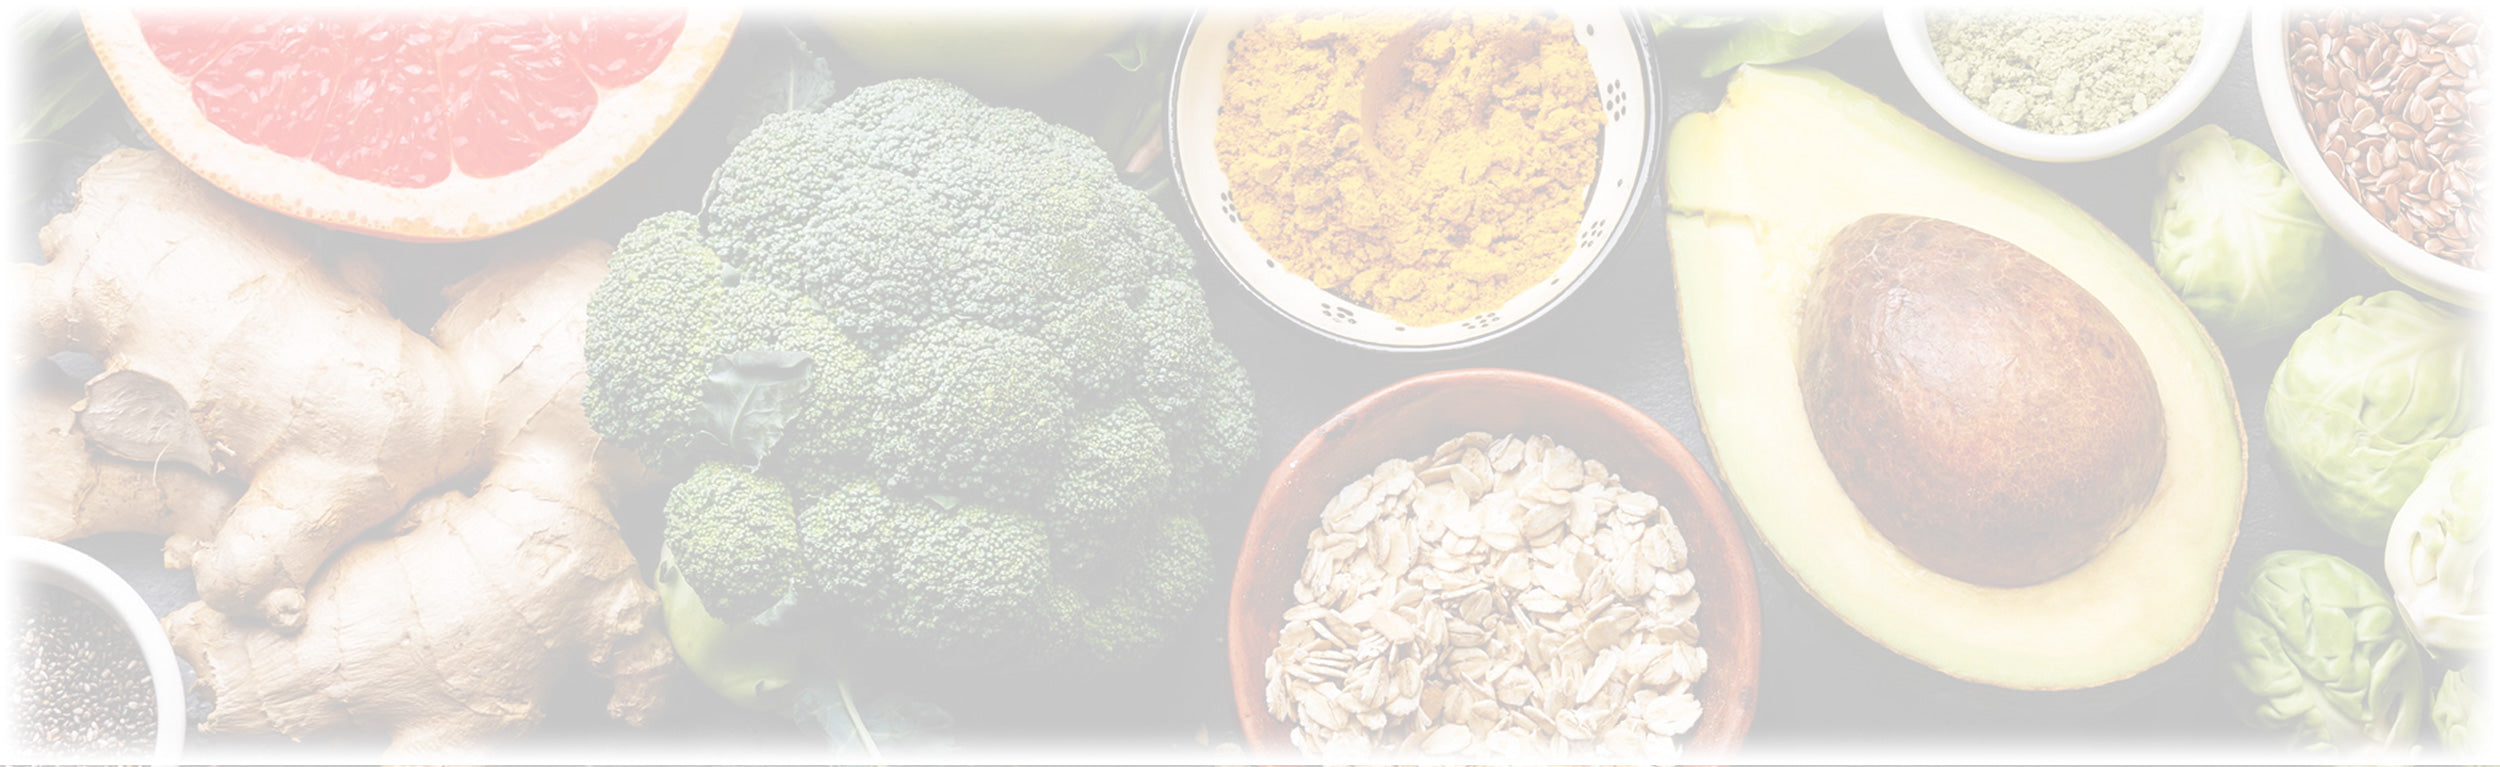 Assorted healthy foods including avocado, broccoli, oats, and ginger, reflecting Lily & Loaf's focus on nutrition.